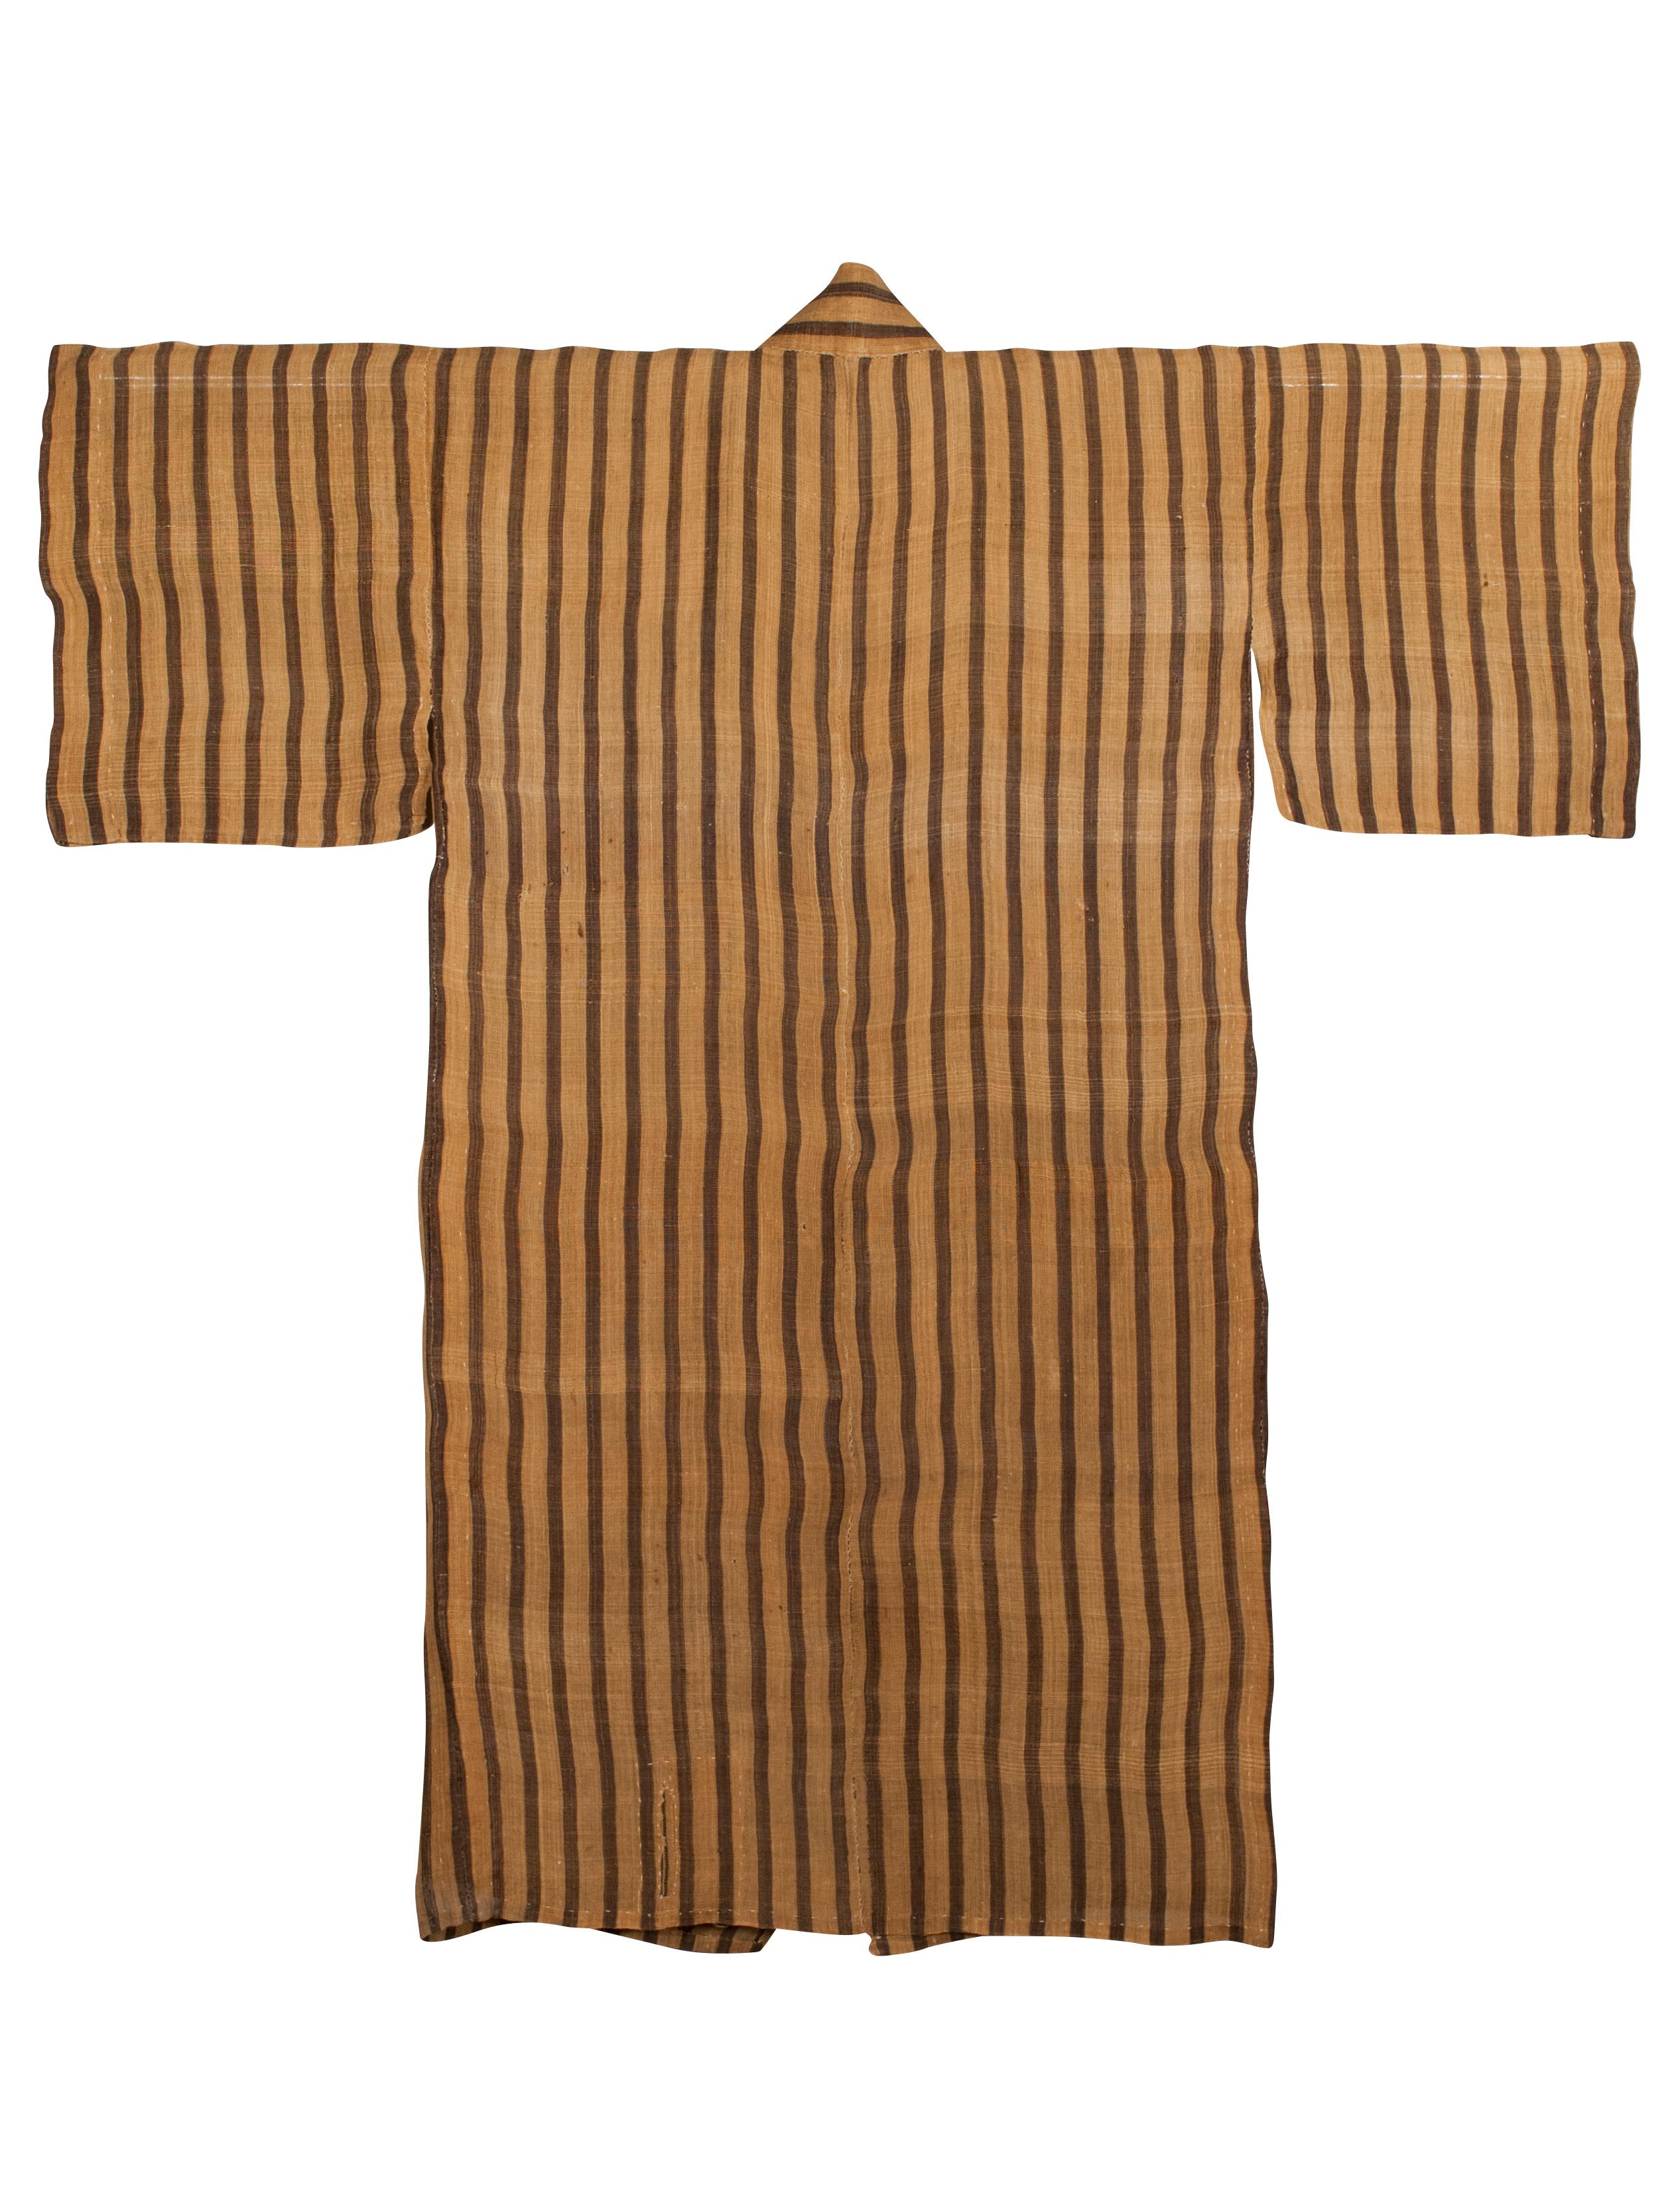 Late 19th century banana fiber Kimono from Okinawa / Bashofu, Japan

Bashofu, or banana fiber cloth, is traditionally made in Okinawa from the inner fiber of banana trees. The fabric is highly valued throughout Japan for its diaphanous, breathable